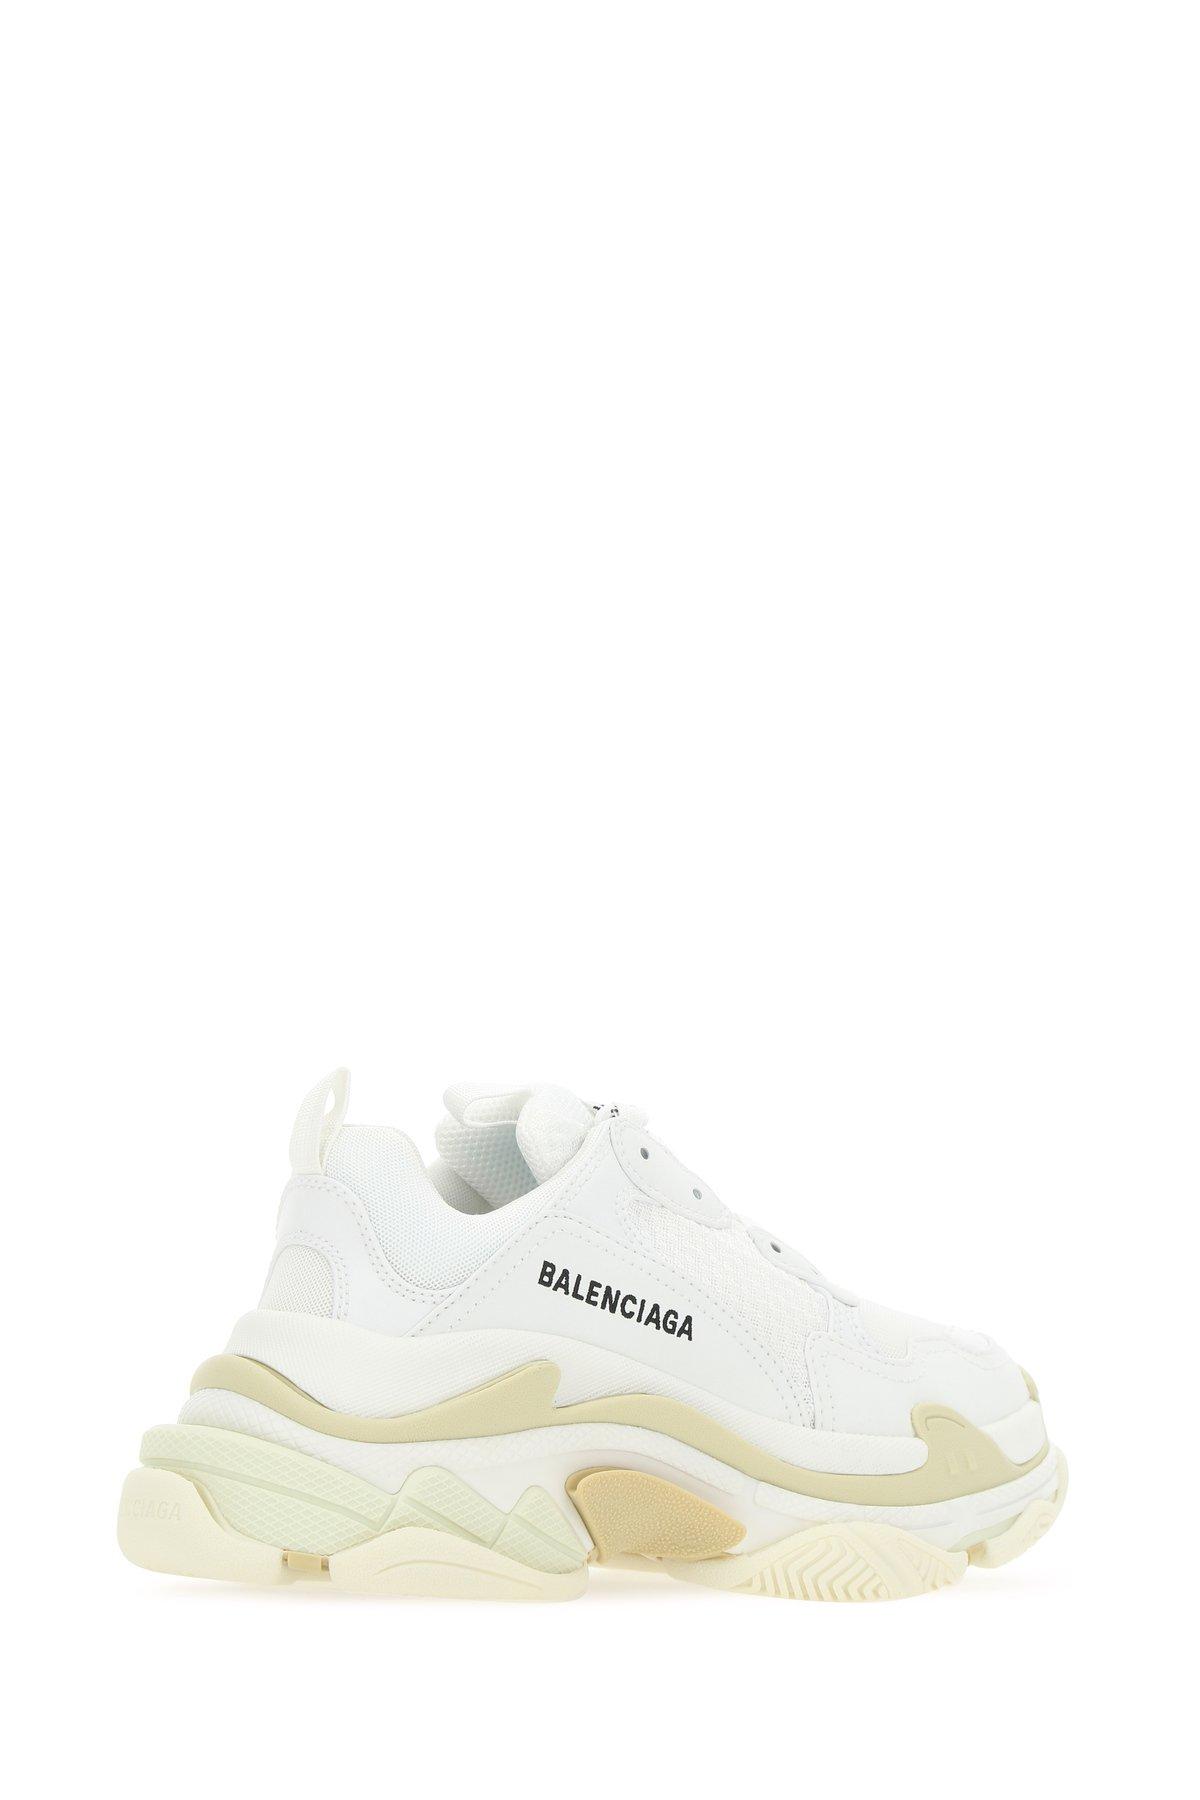 Balenciaga Triple S Sneakers In Mesh Leather in White - Save 70% - Lyst